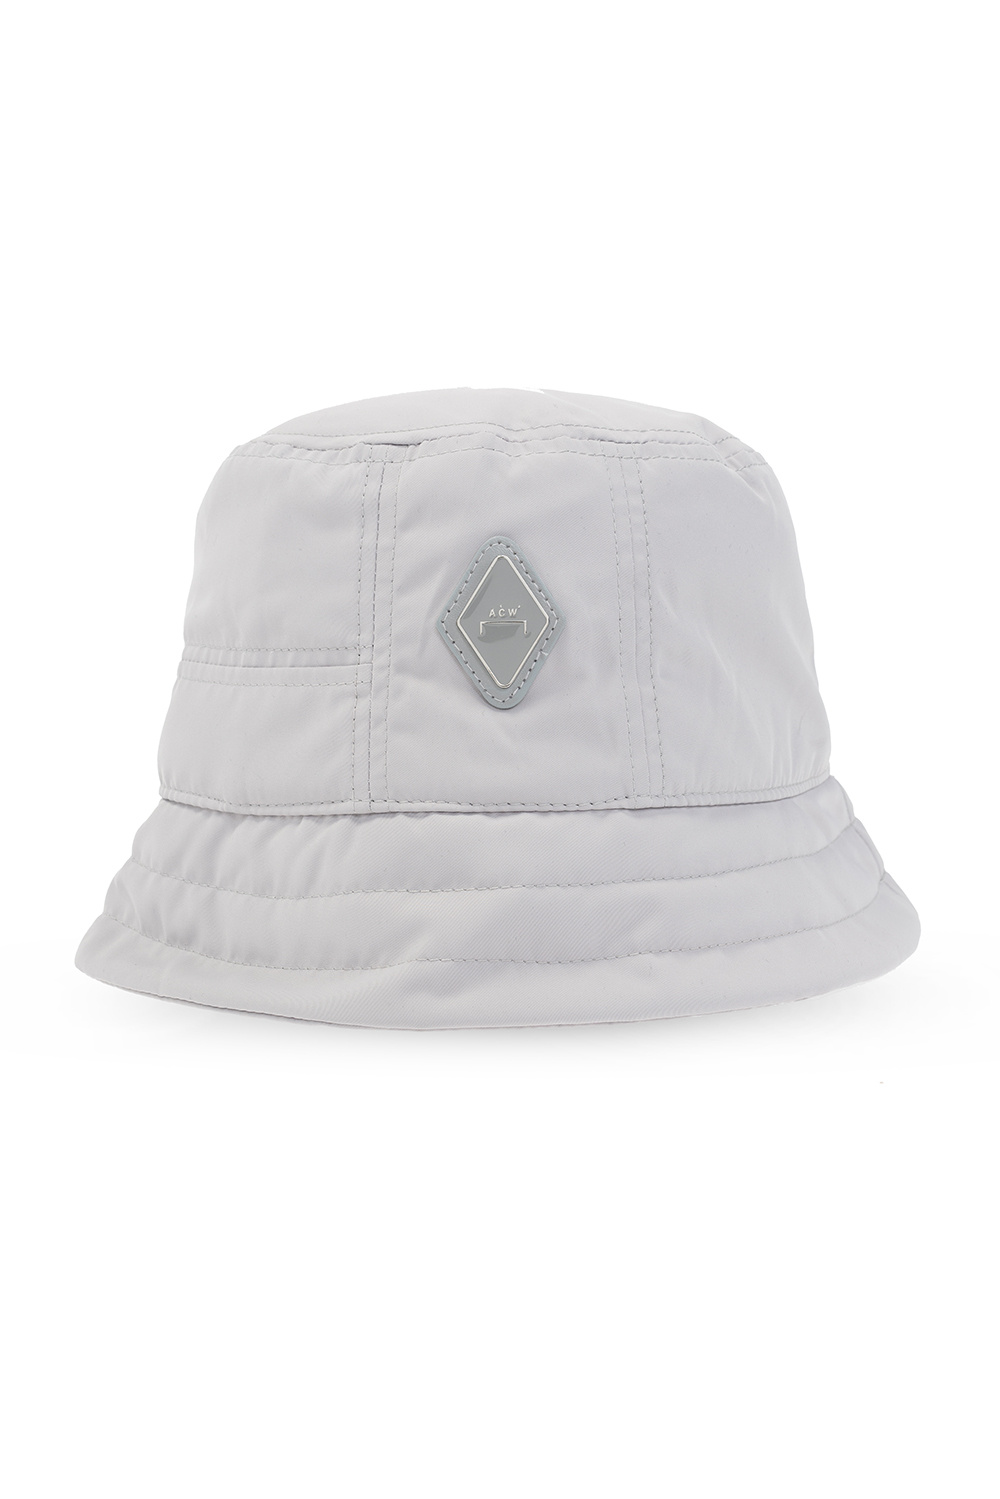 A-COLD-WALL* XXXI hat with logo